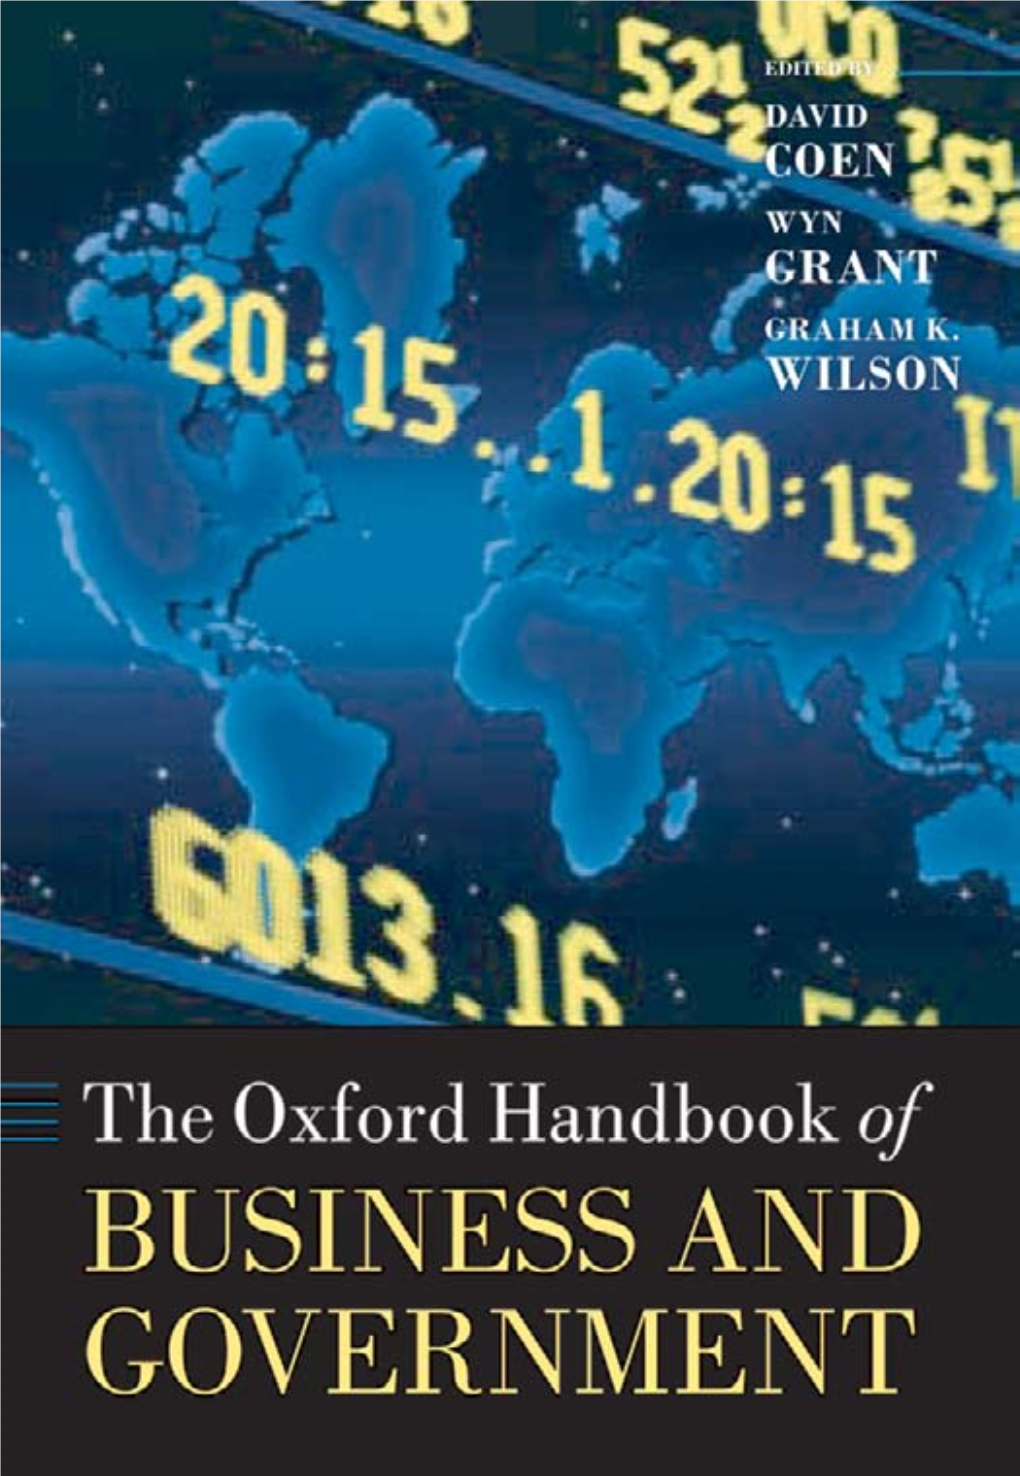 The Oxford Handbook of BUSINESS and GOVERNMENT This Page Intentionally Left Blank the Oxford Handbook Of